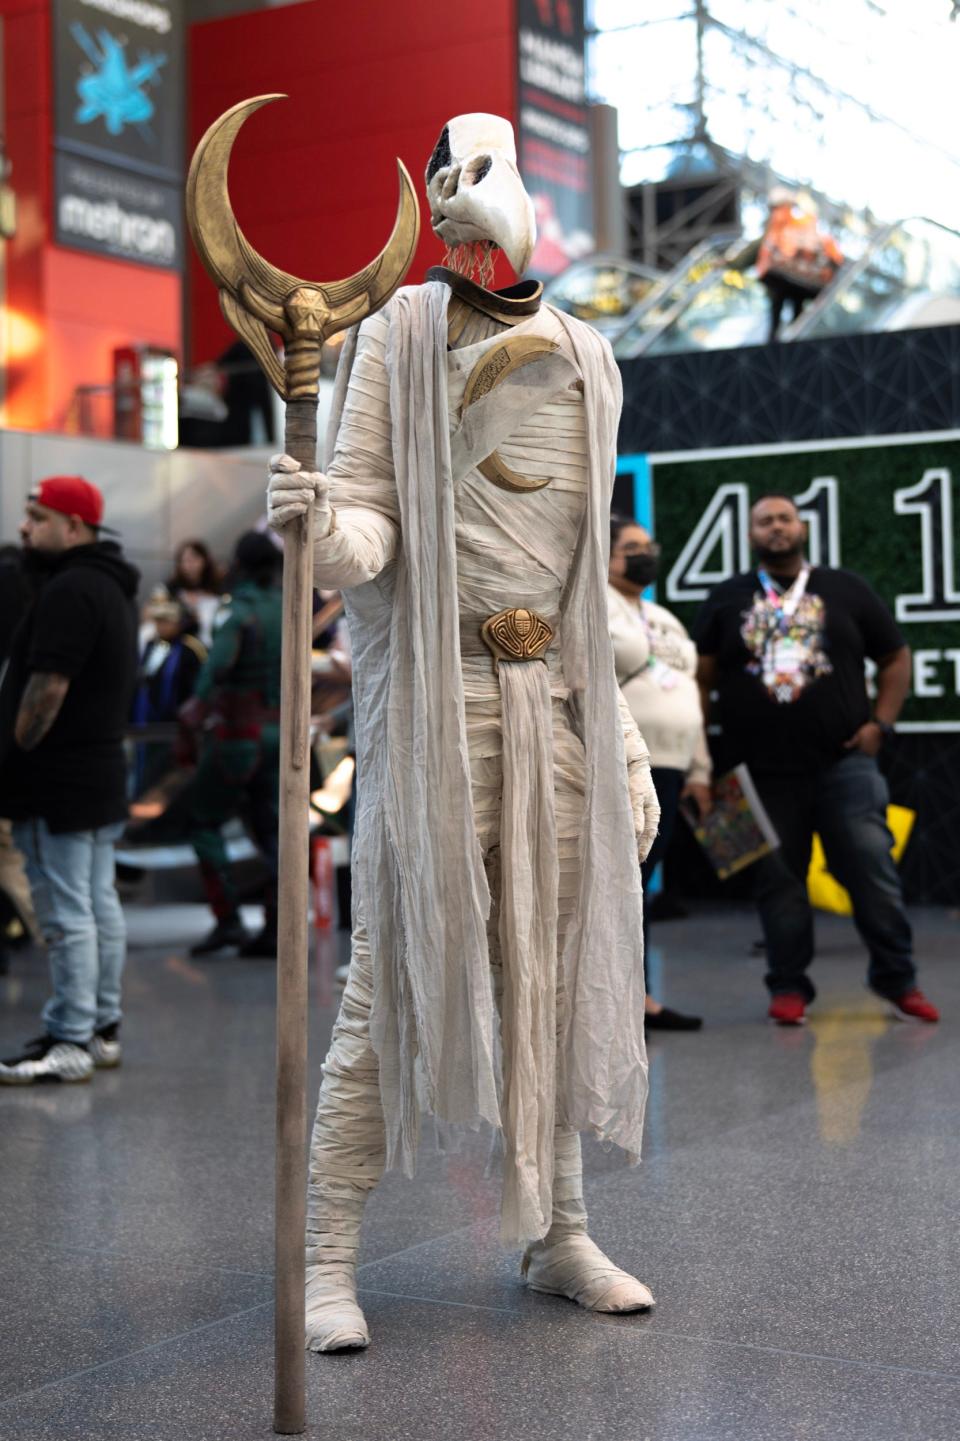 A cosplayer dressed as Khonshu from "Moon Knight" at New York Comic Con 2022.